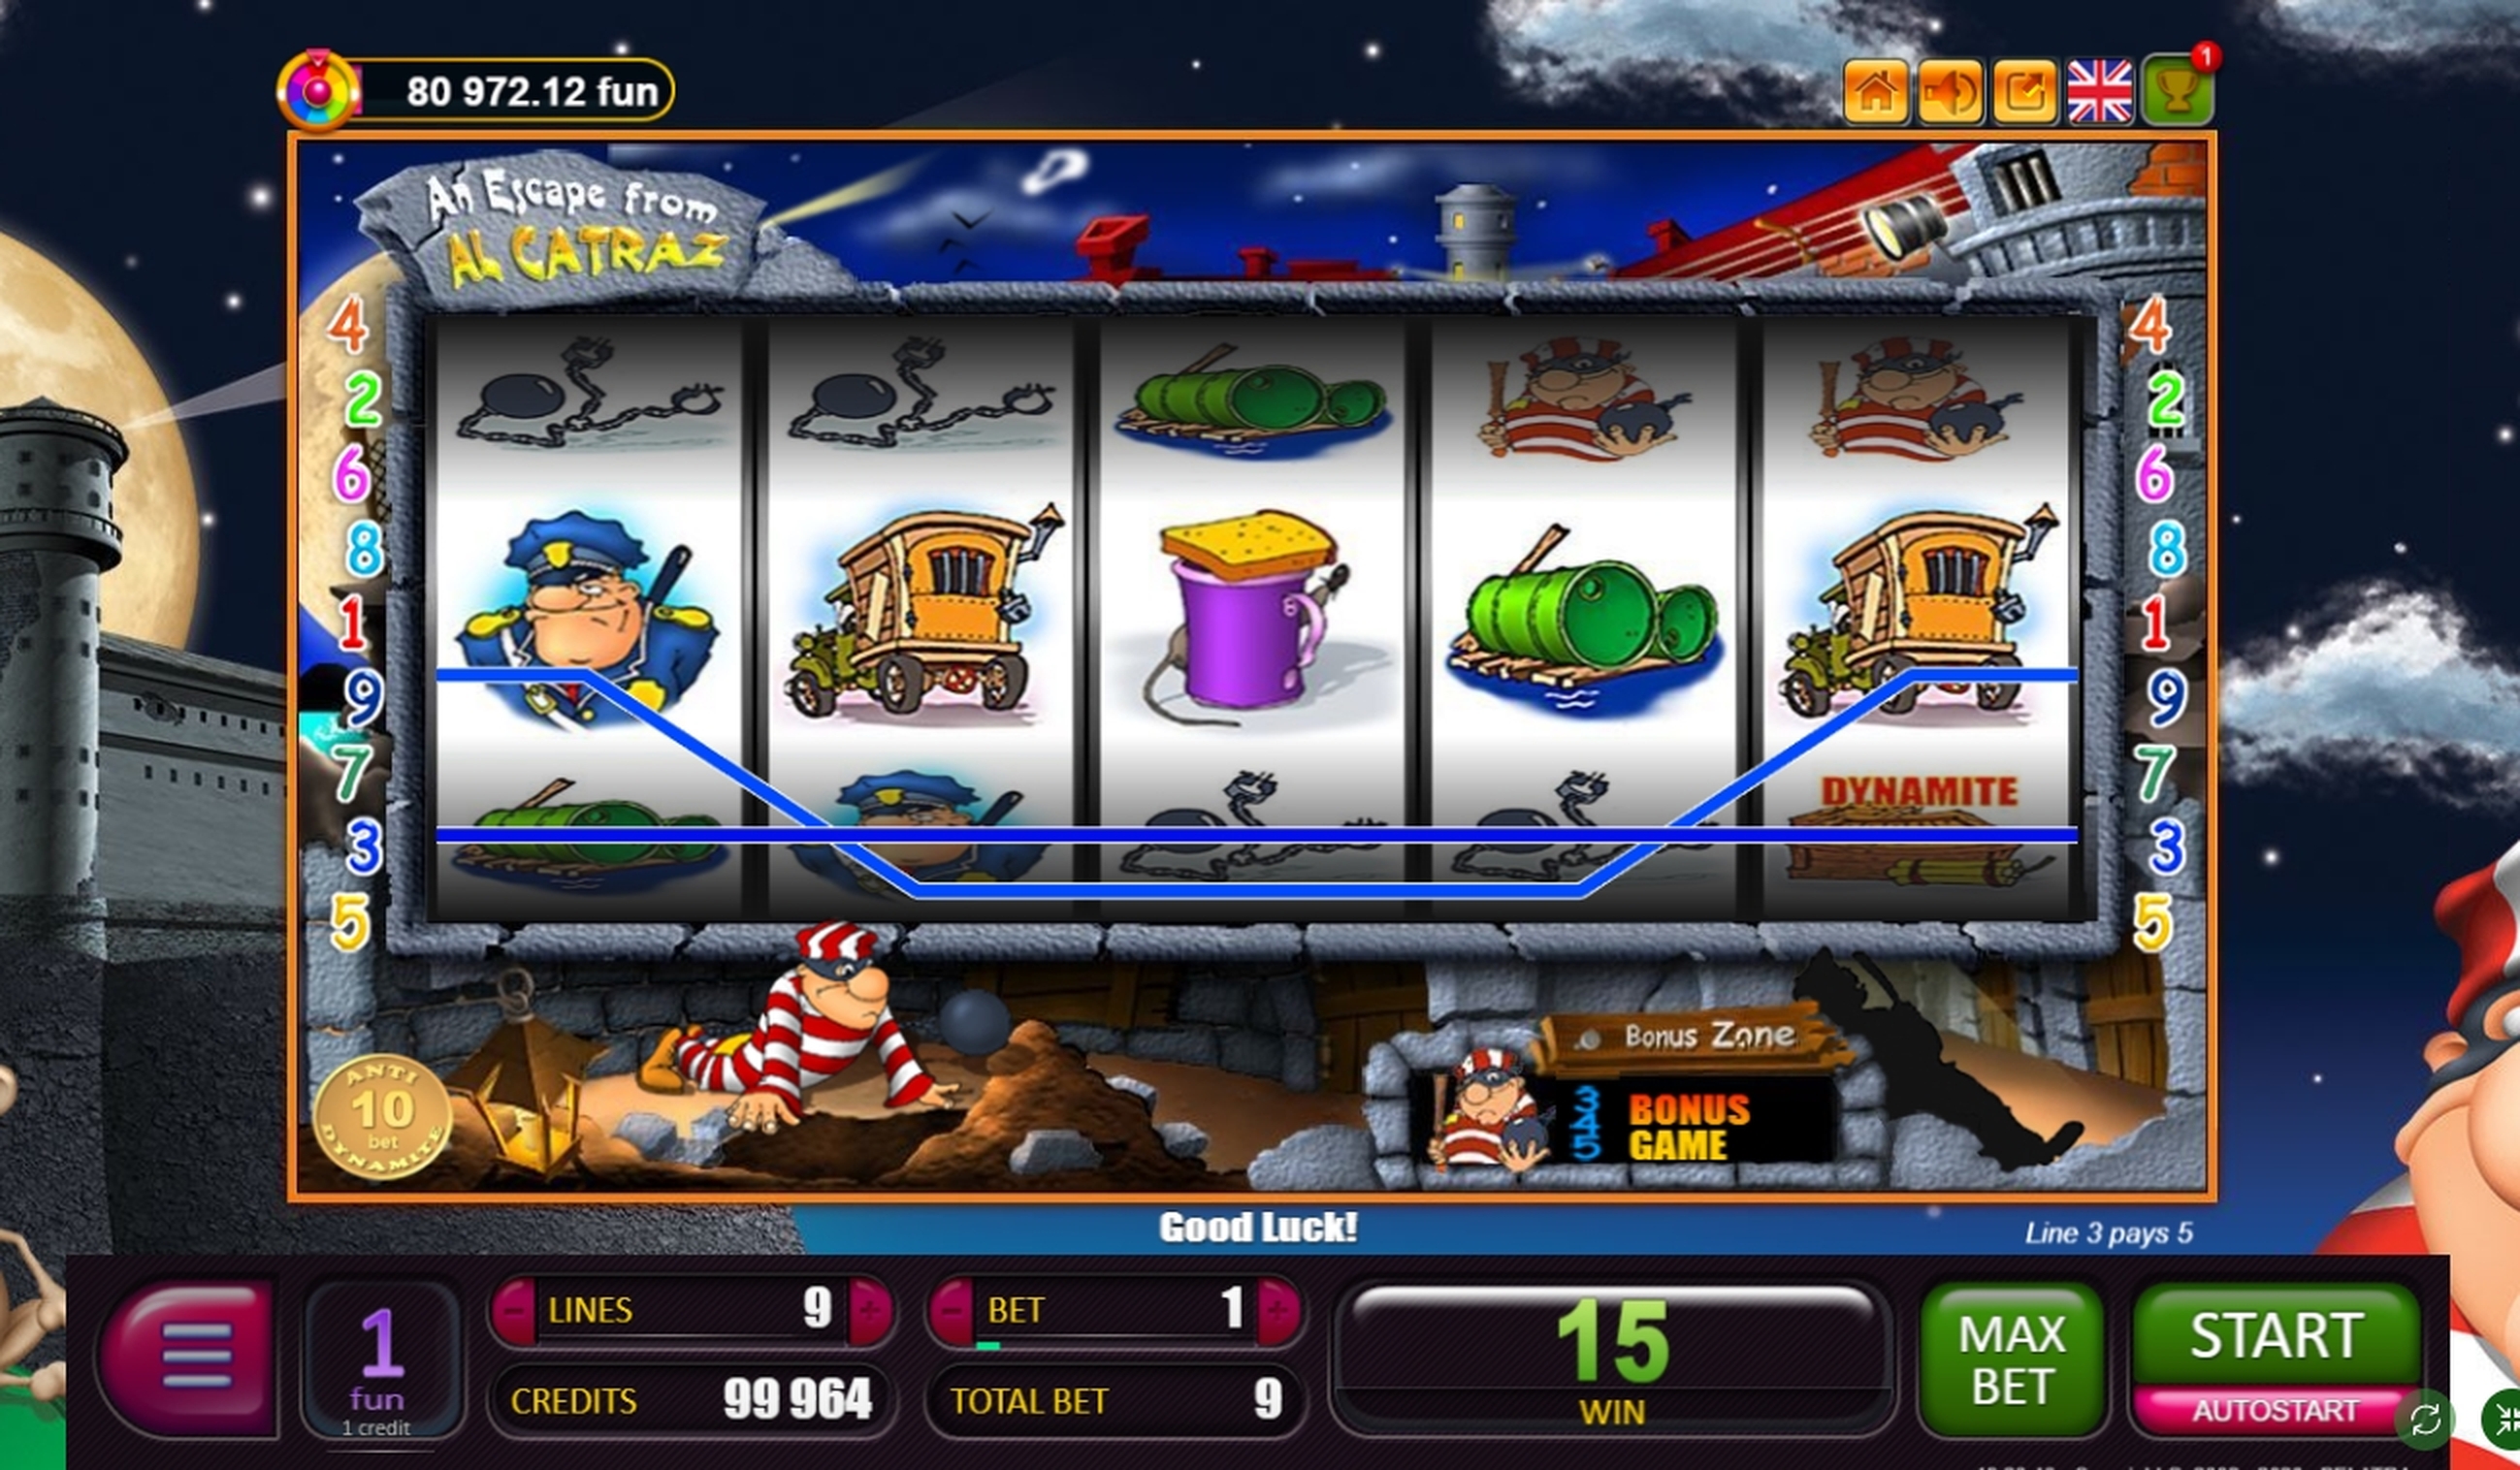 Win Money in An Escape from Alcatraz Free Slot Game by Belatra Games